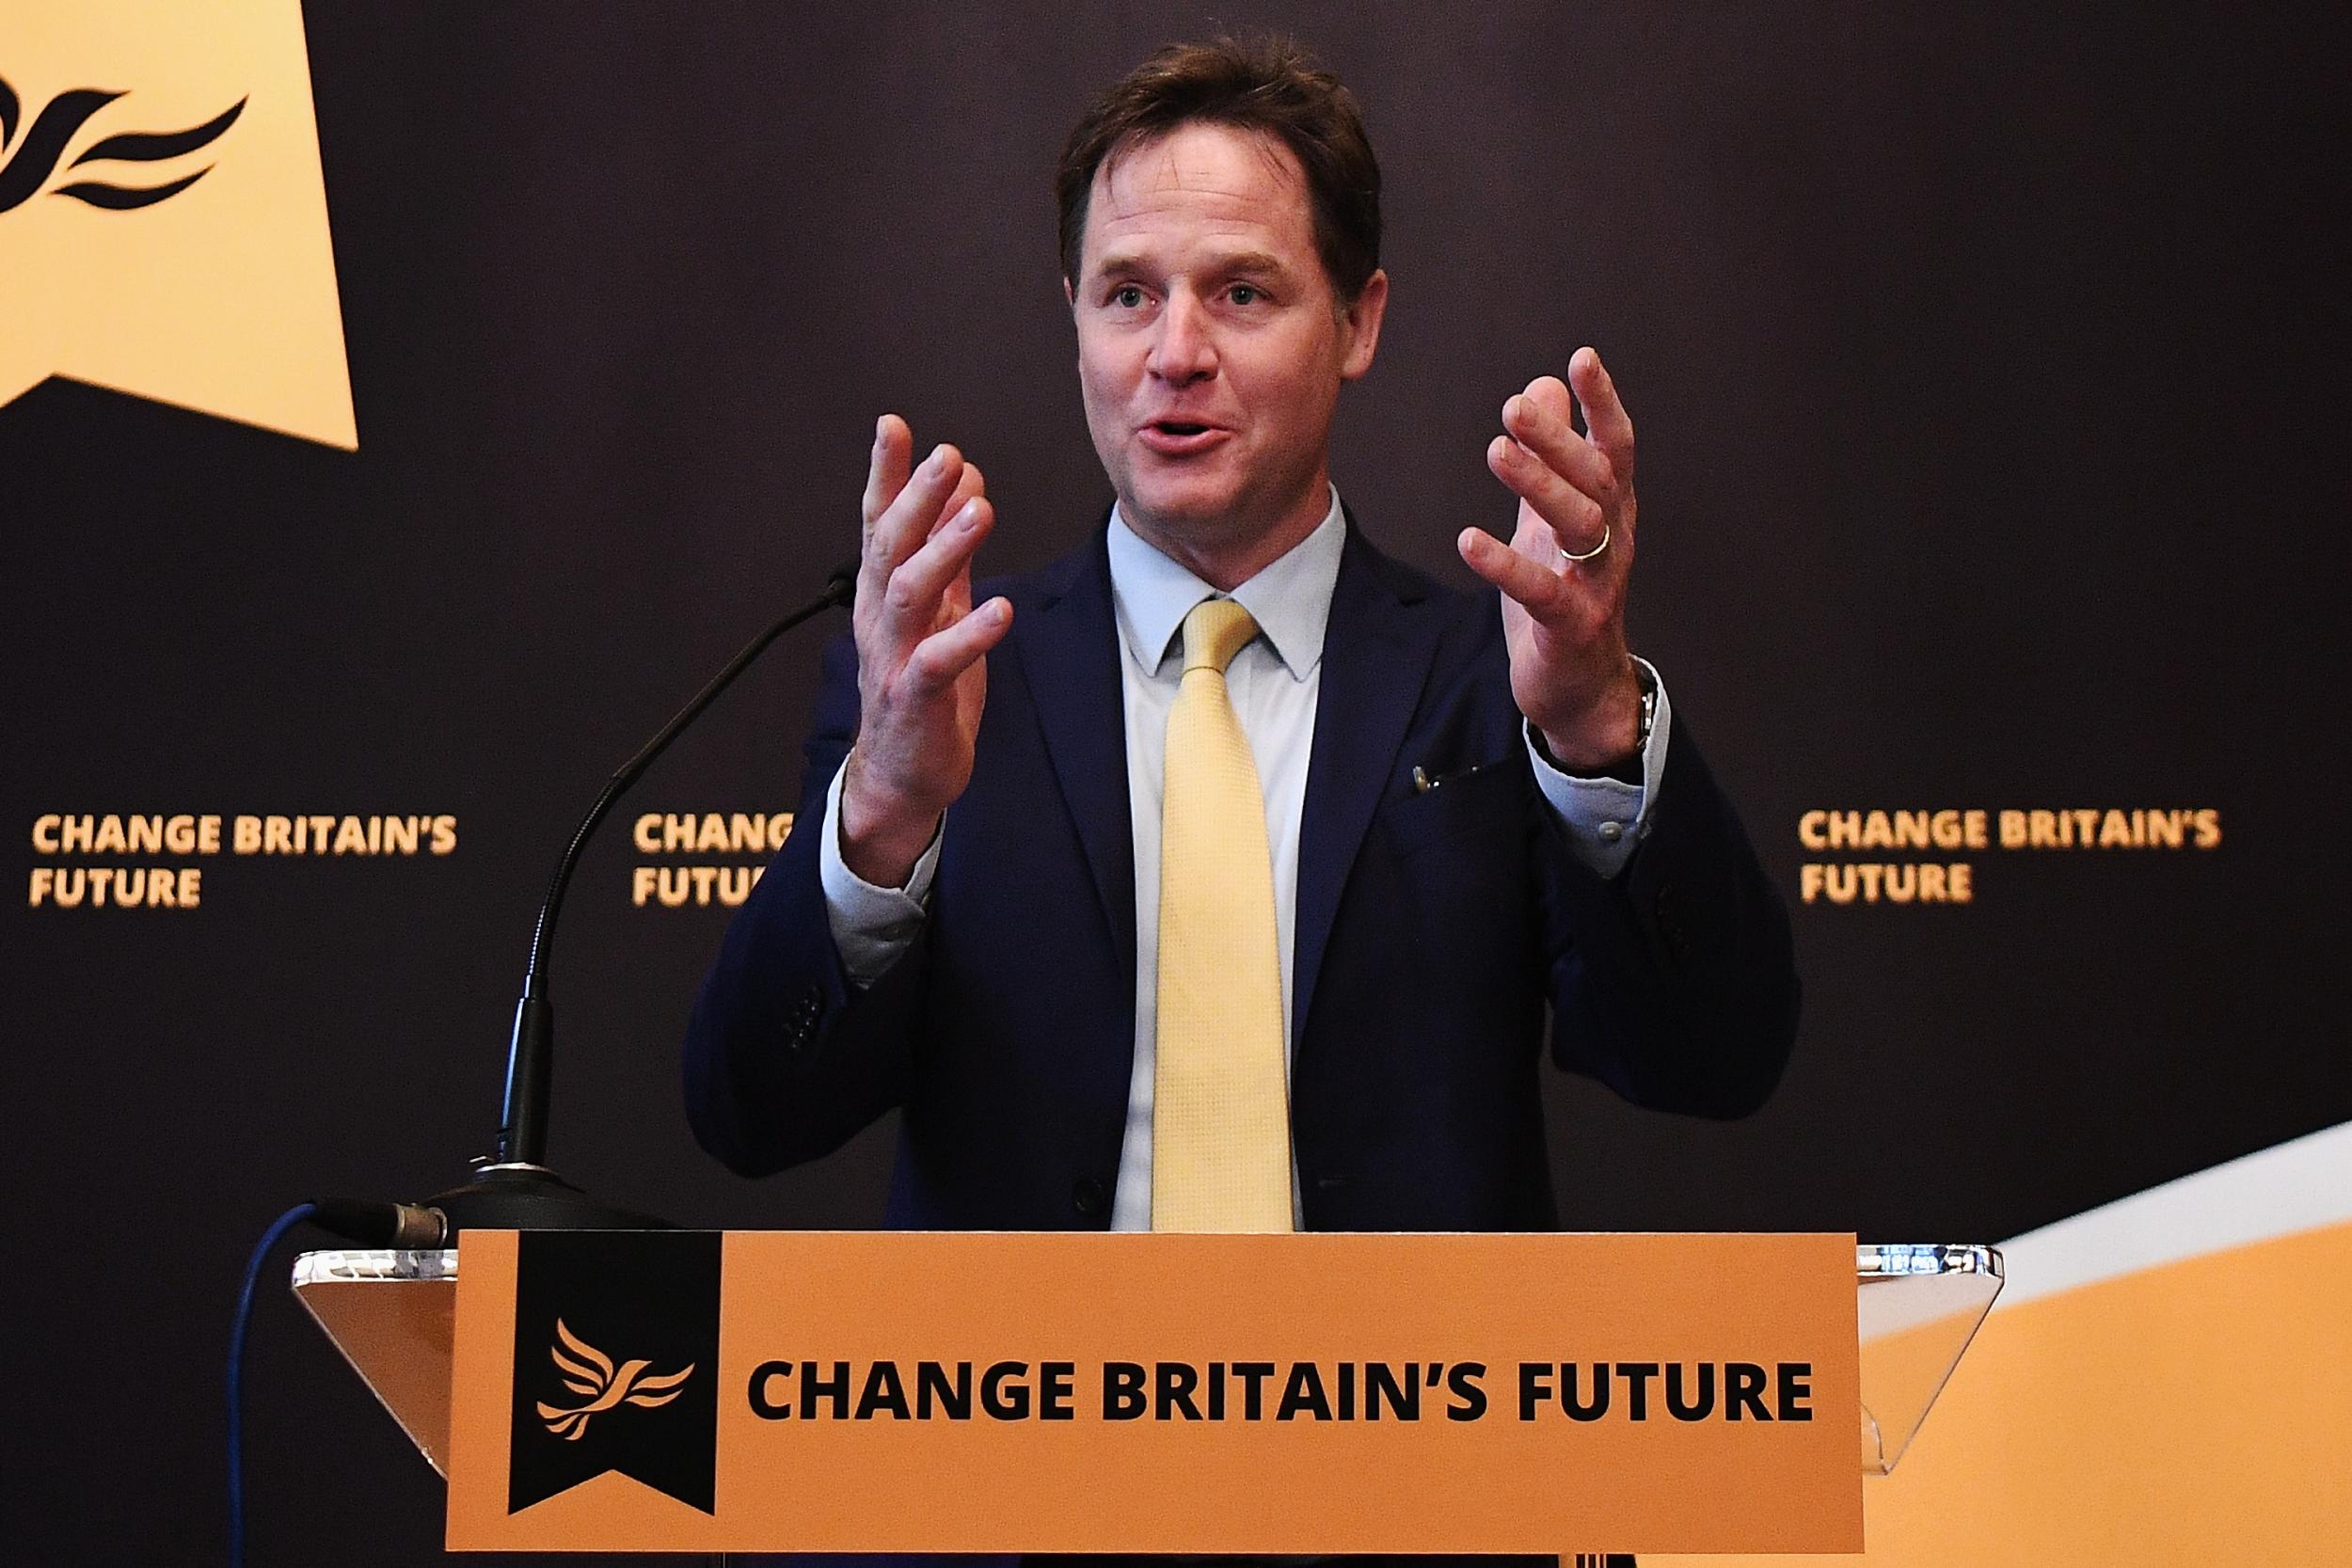 &#13;
Former Liberal Democrat leader Nick Clegg delivers a speech at the National Liberal Club in London &#13;